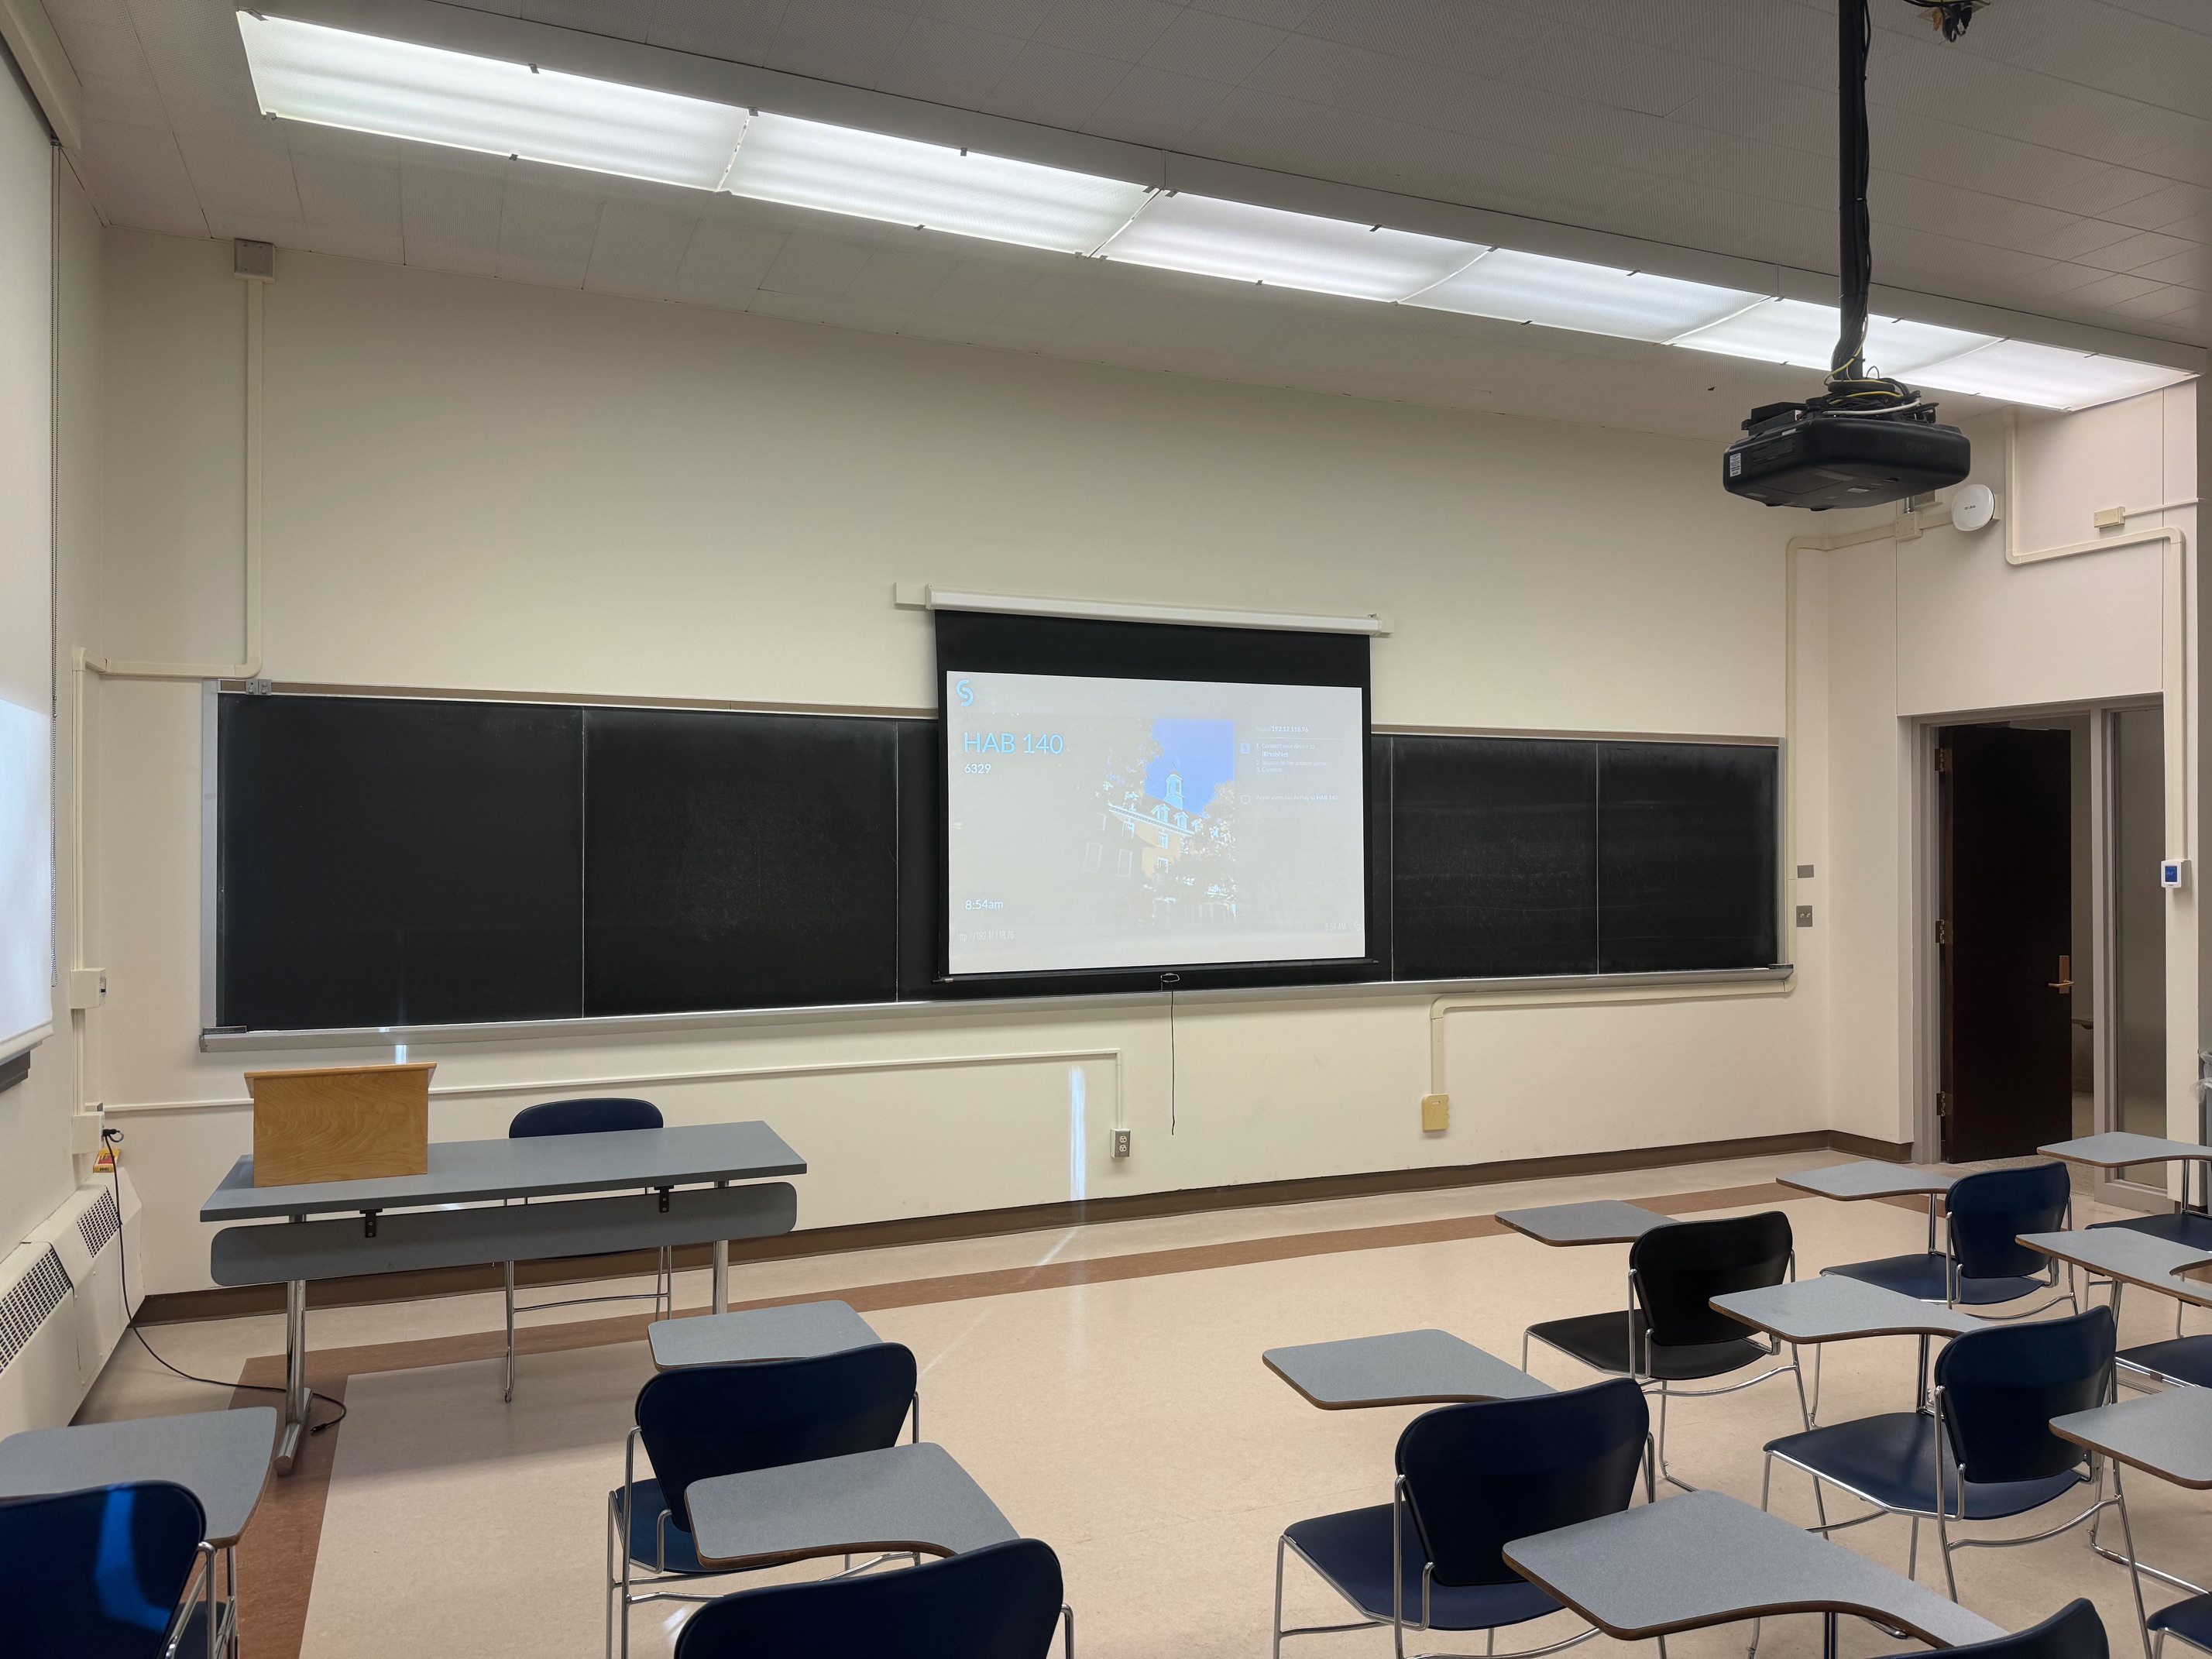 A view of the classroom with movable tableted arm chairs, instructor table, projection screen and chalkboard.